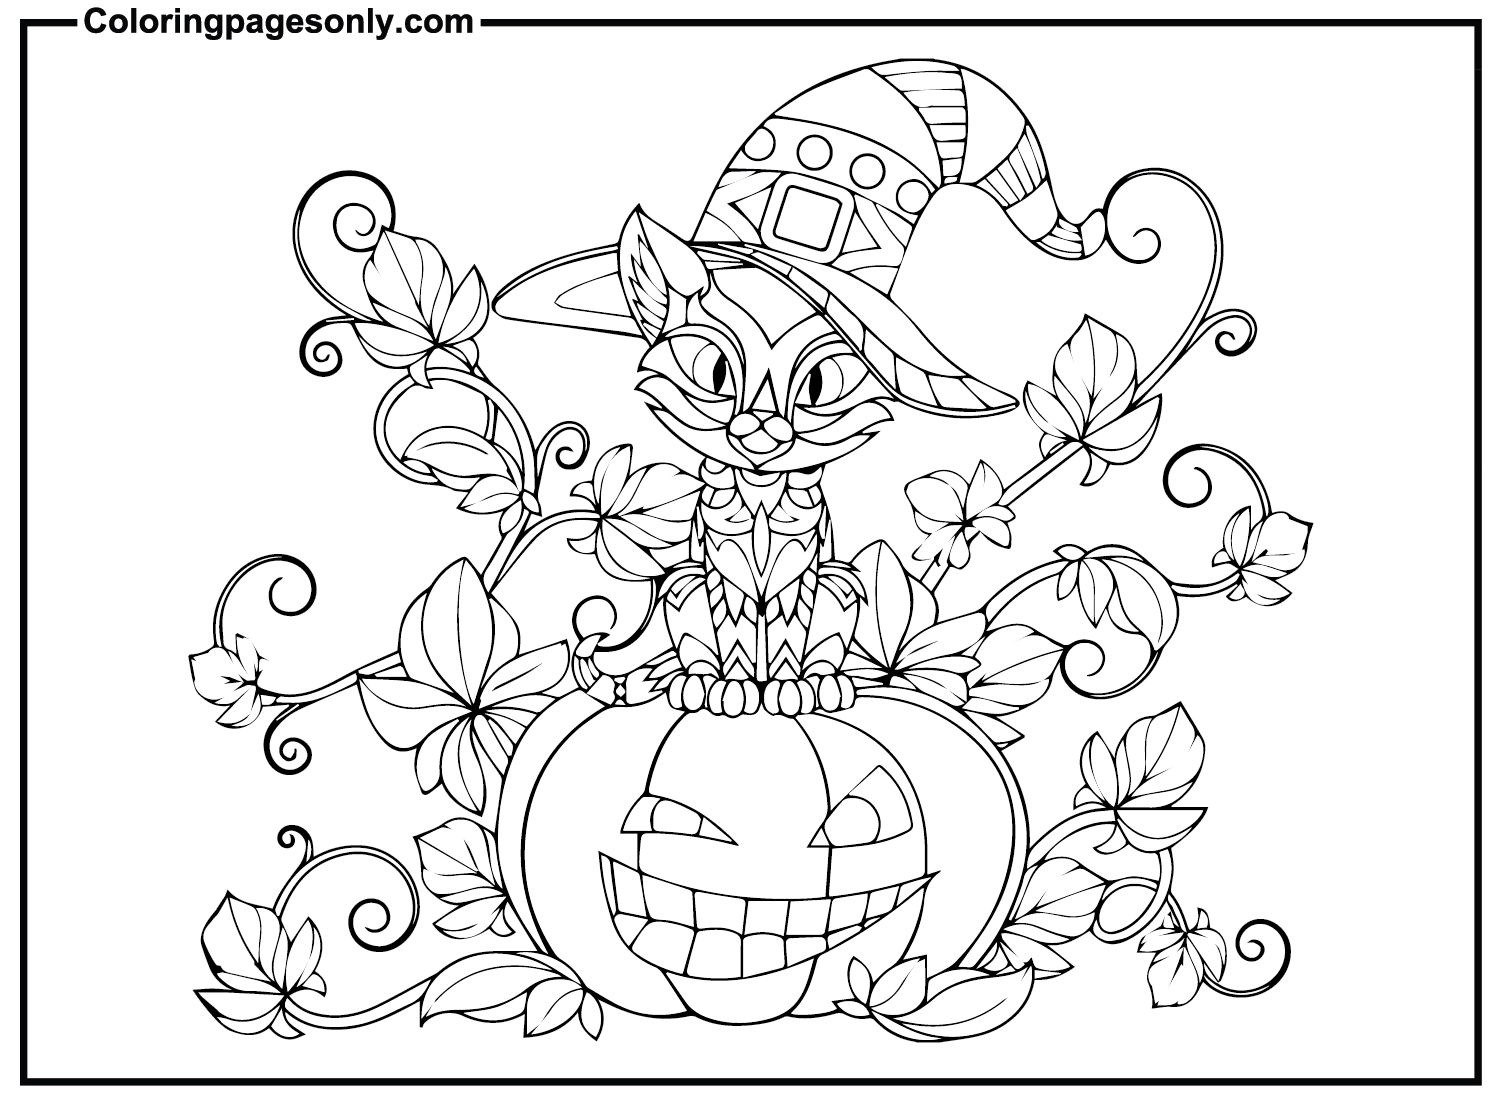 Printable Hocus Pocus Coloring Pages